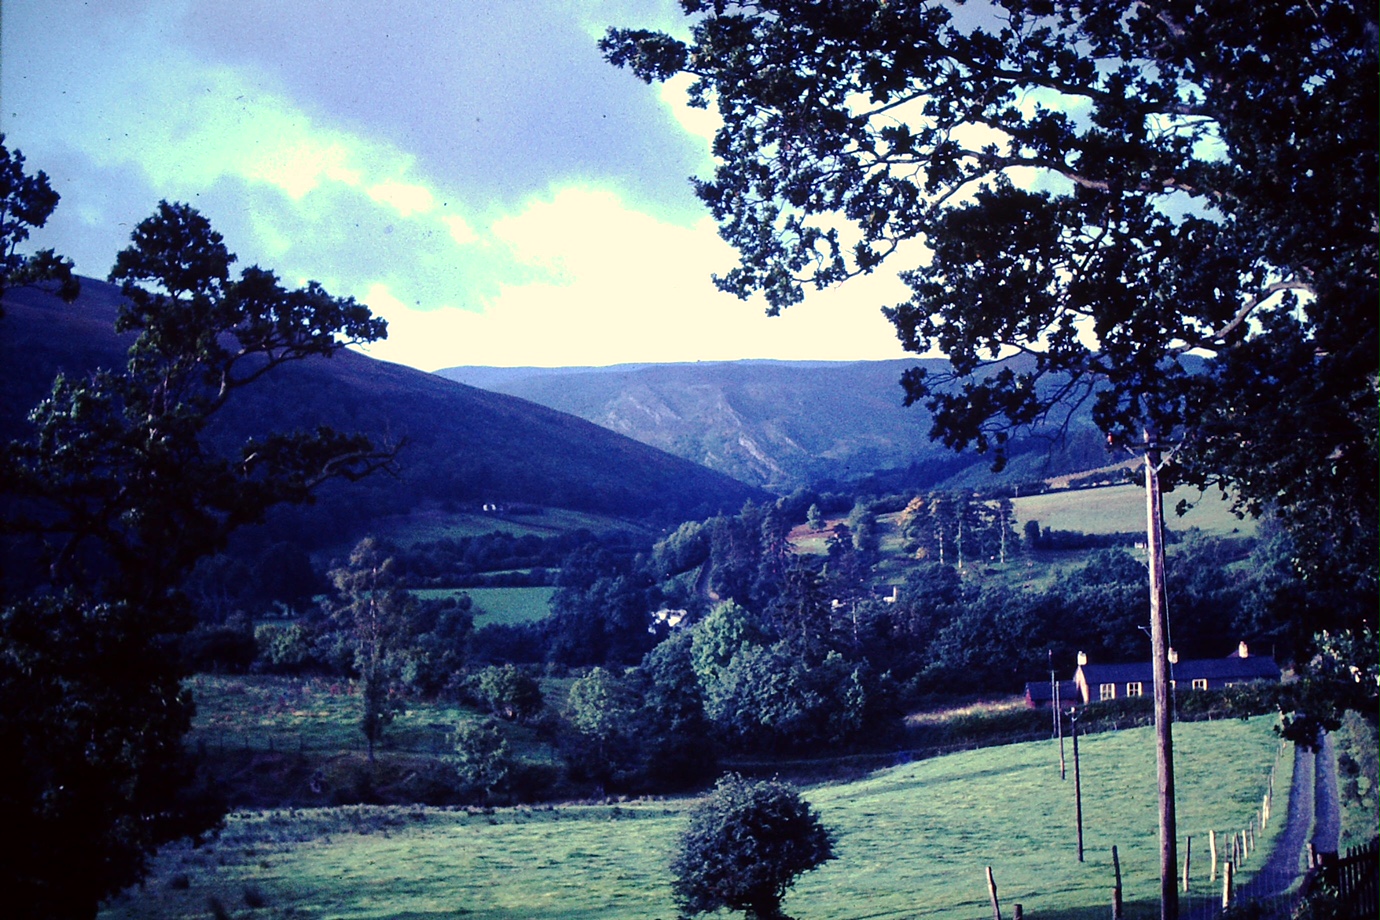 Gigrin Farm: The Wye Valley from the bedroom window, 1966.